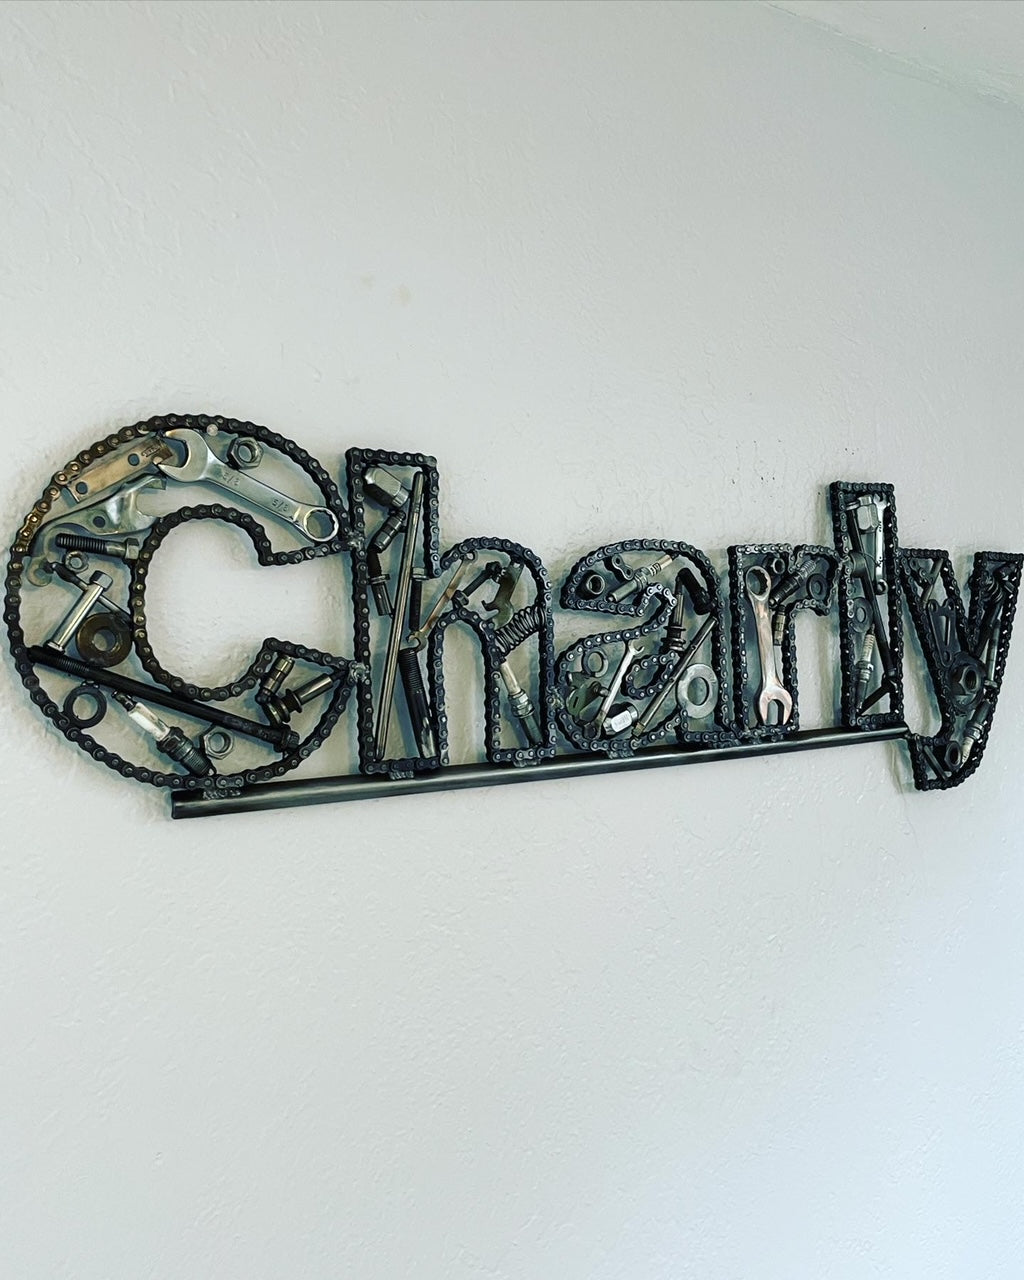 A name sign spelling "Charly" hanging on a wall, each letter made out of car parts and outlined with timing chain.